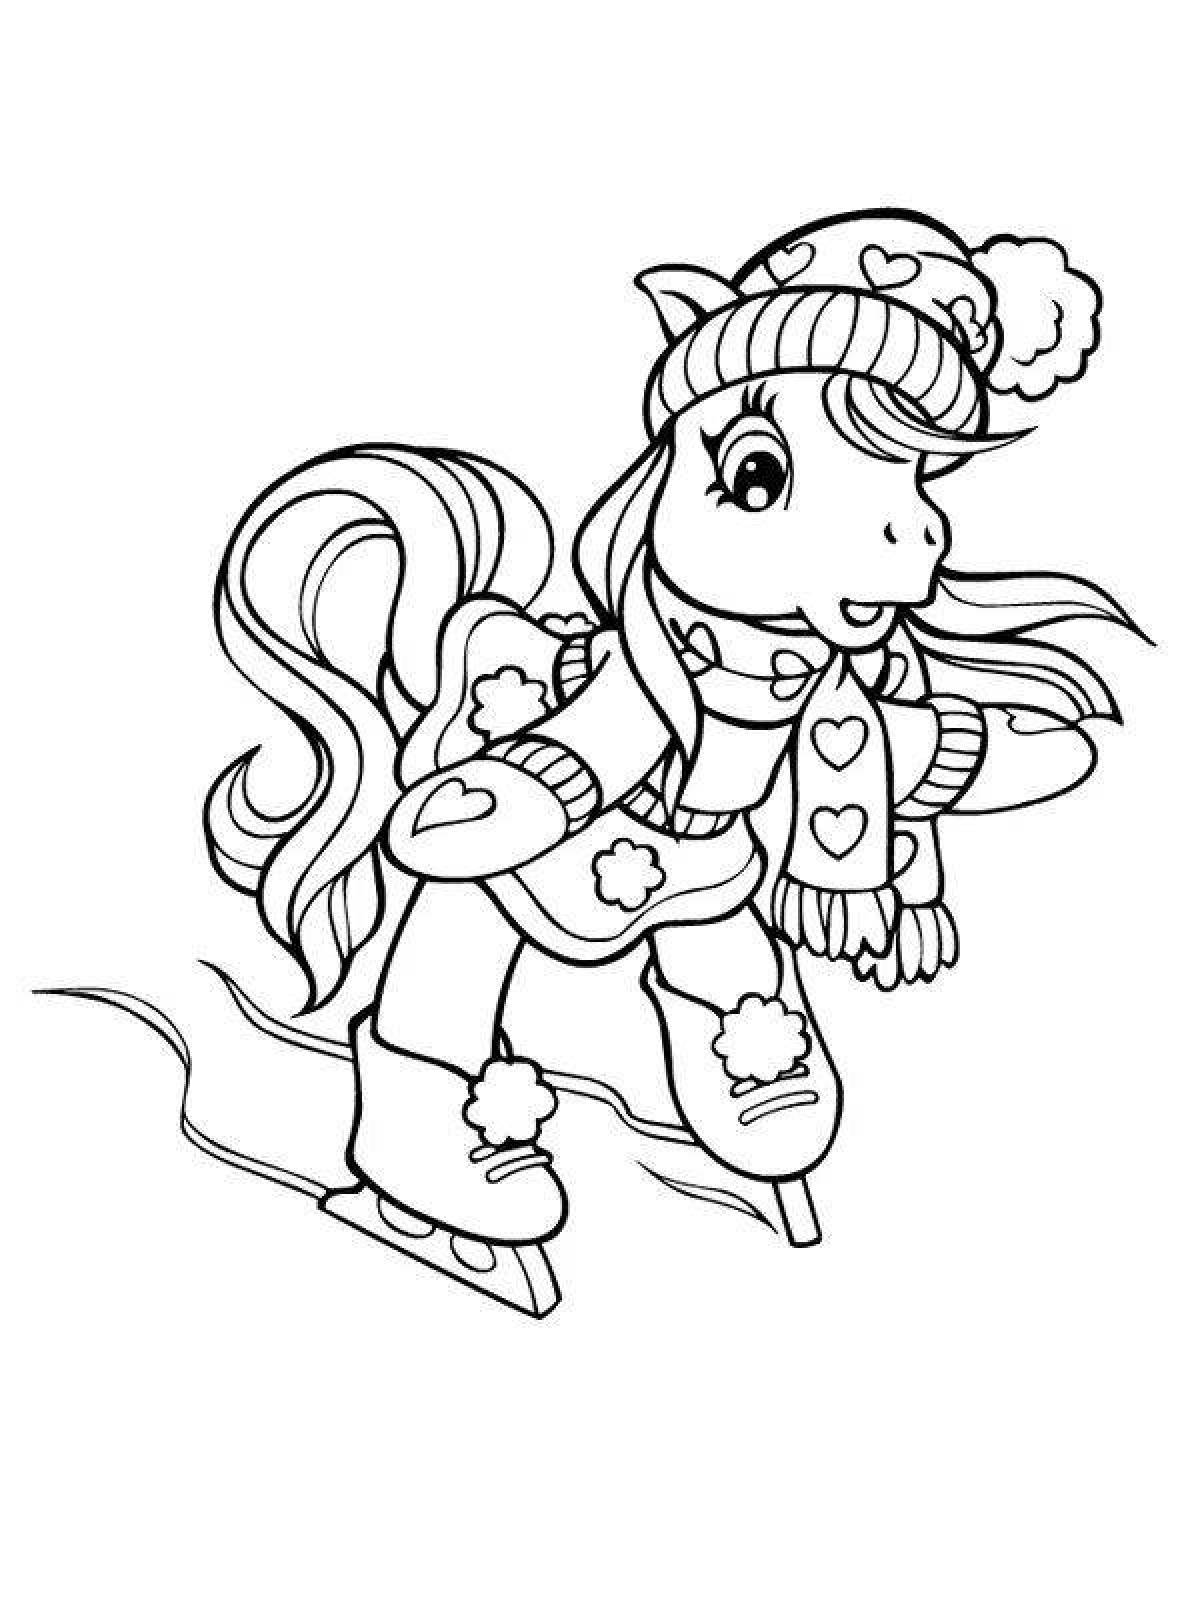 Fancy pony sleigh coloring page